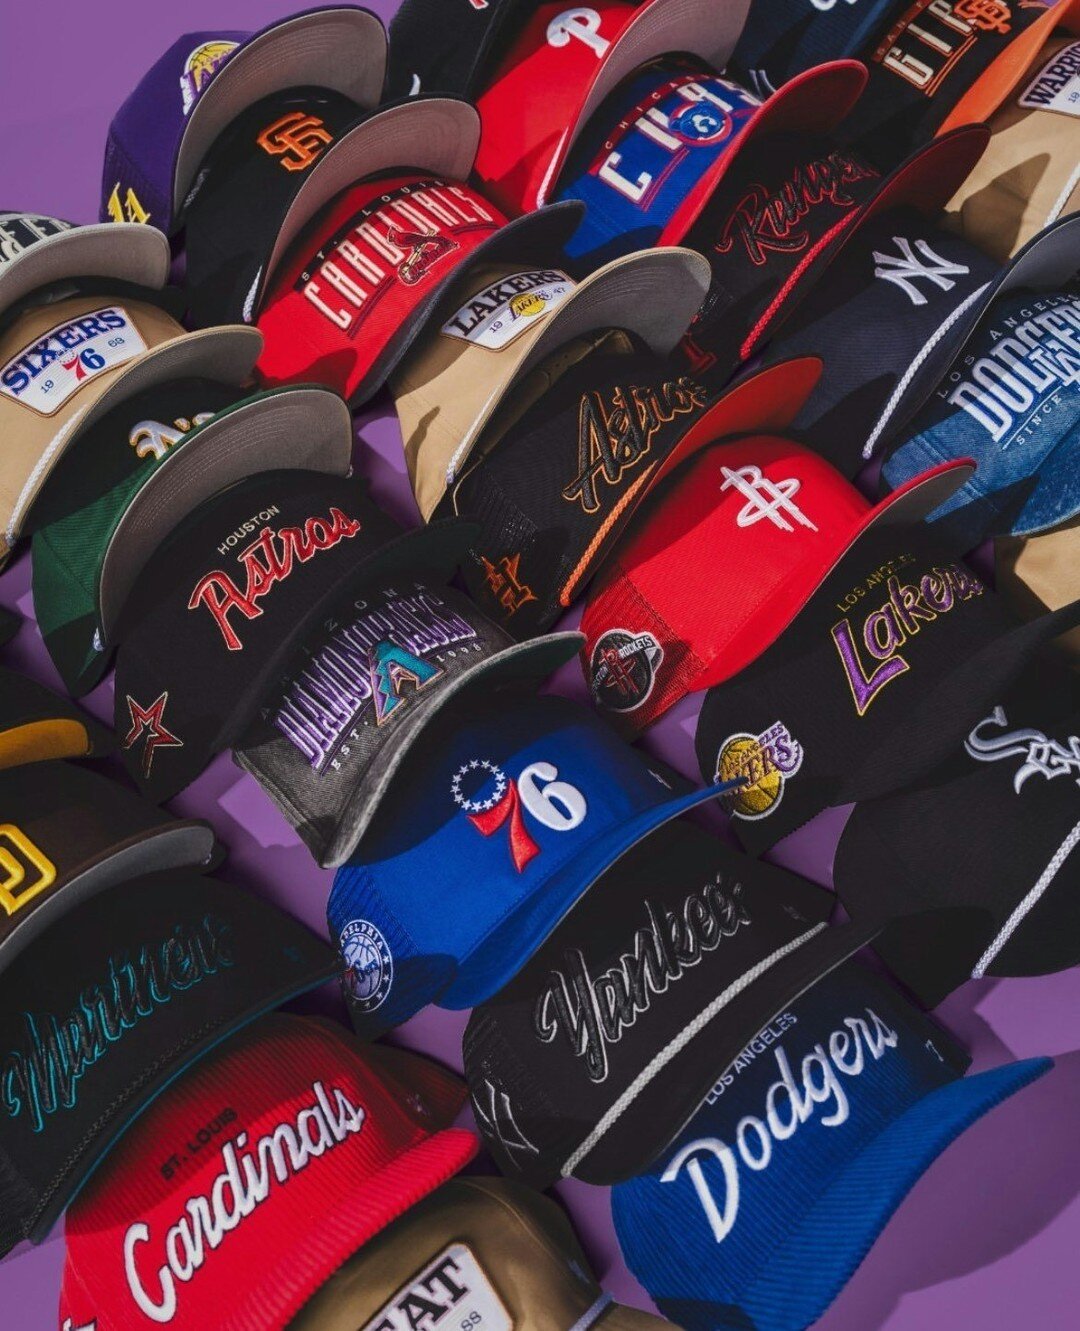 Get ready to rep your favorite sports teams with @lids fresh new spring collections. 🧢 ☀️ 

From caps to jerseys, they have what you need to show off your team pride in style. Come by and check out the latest arrivals today! 🔥 🎉 

#WarwickMall #PV